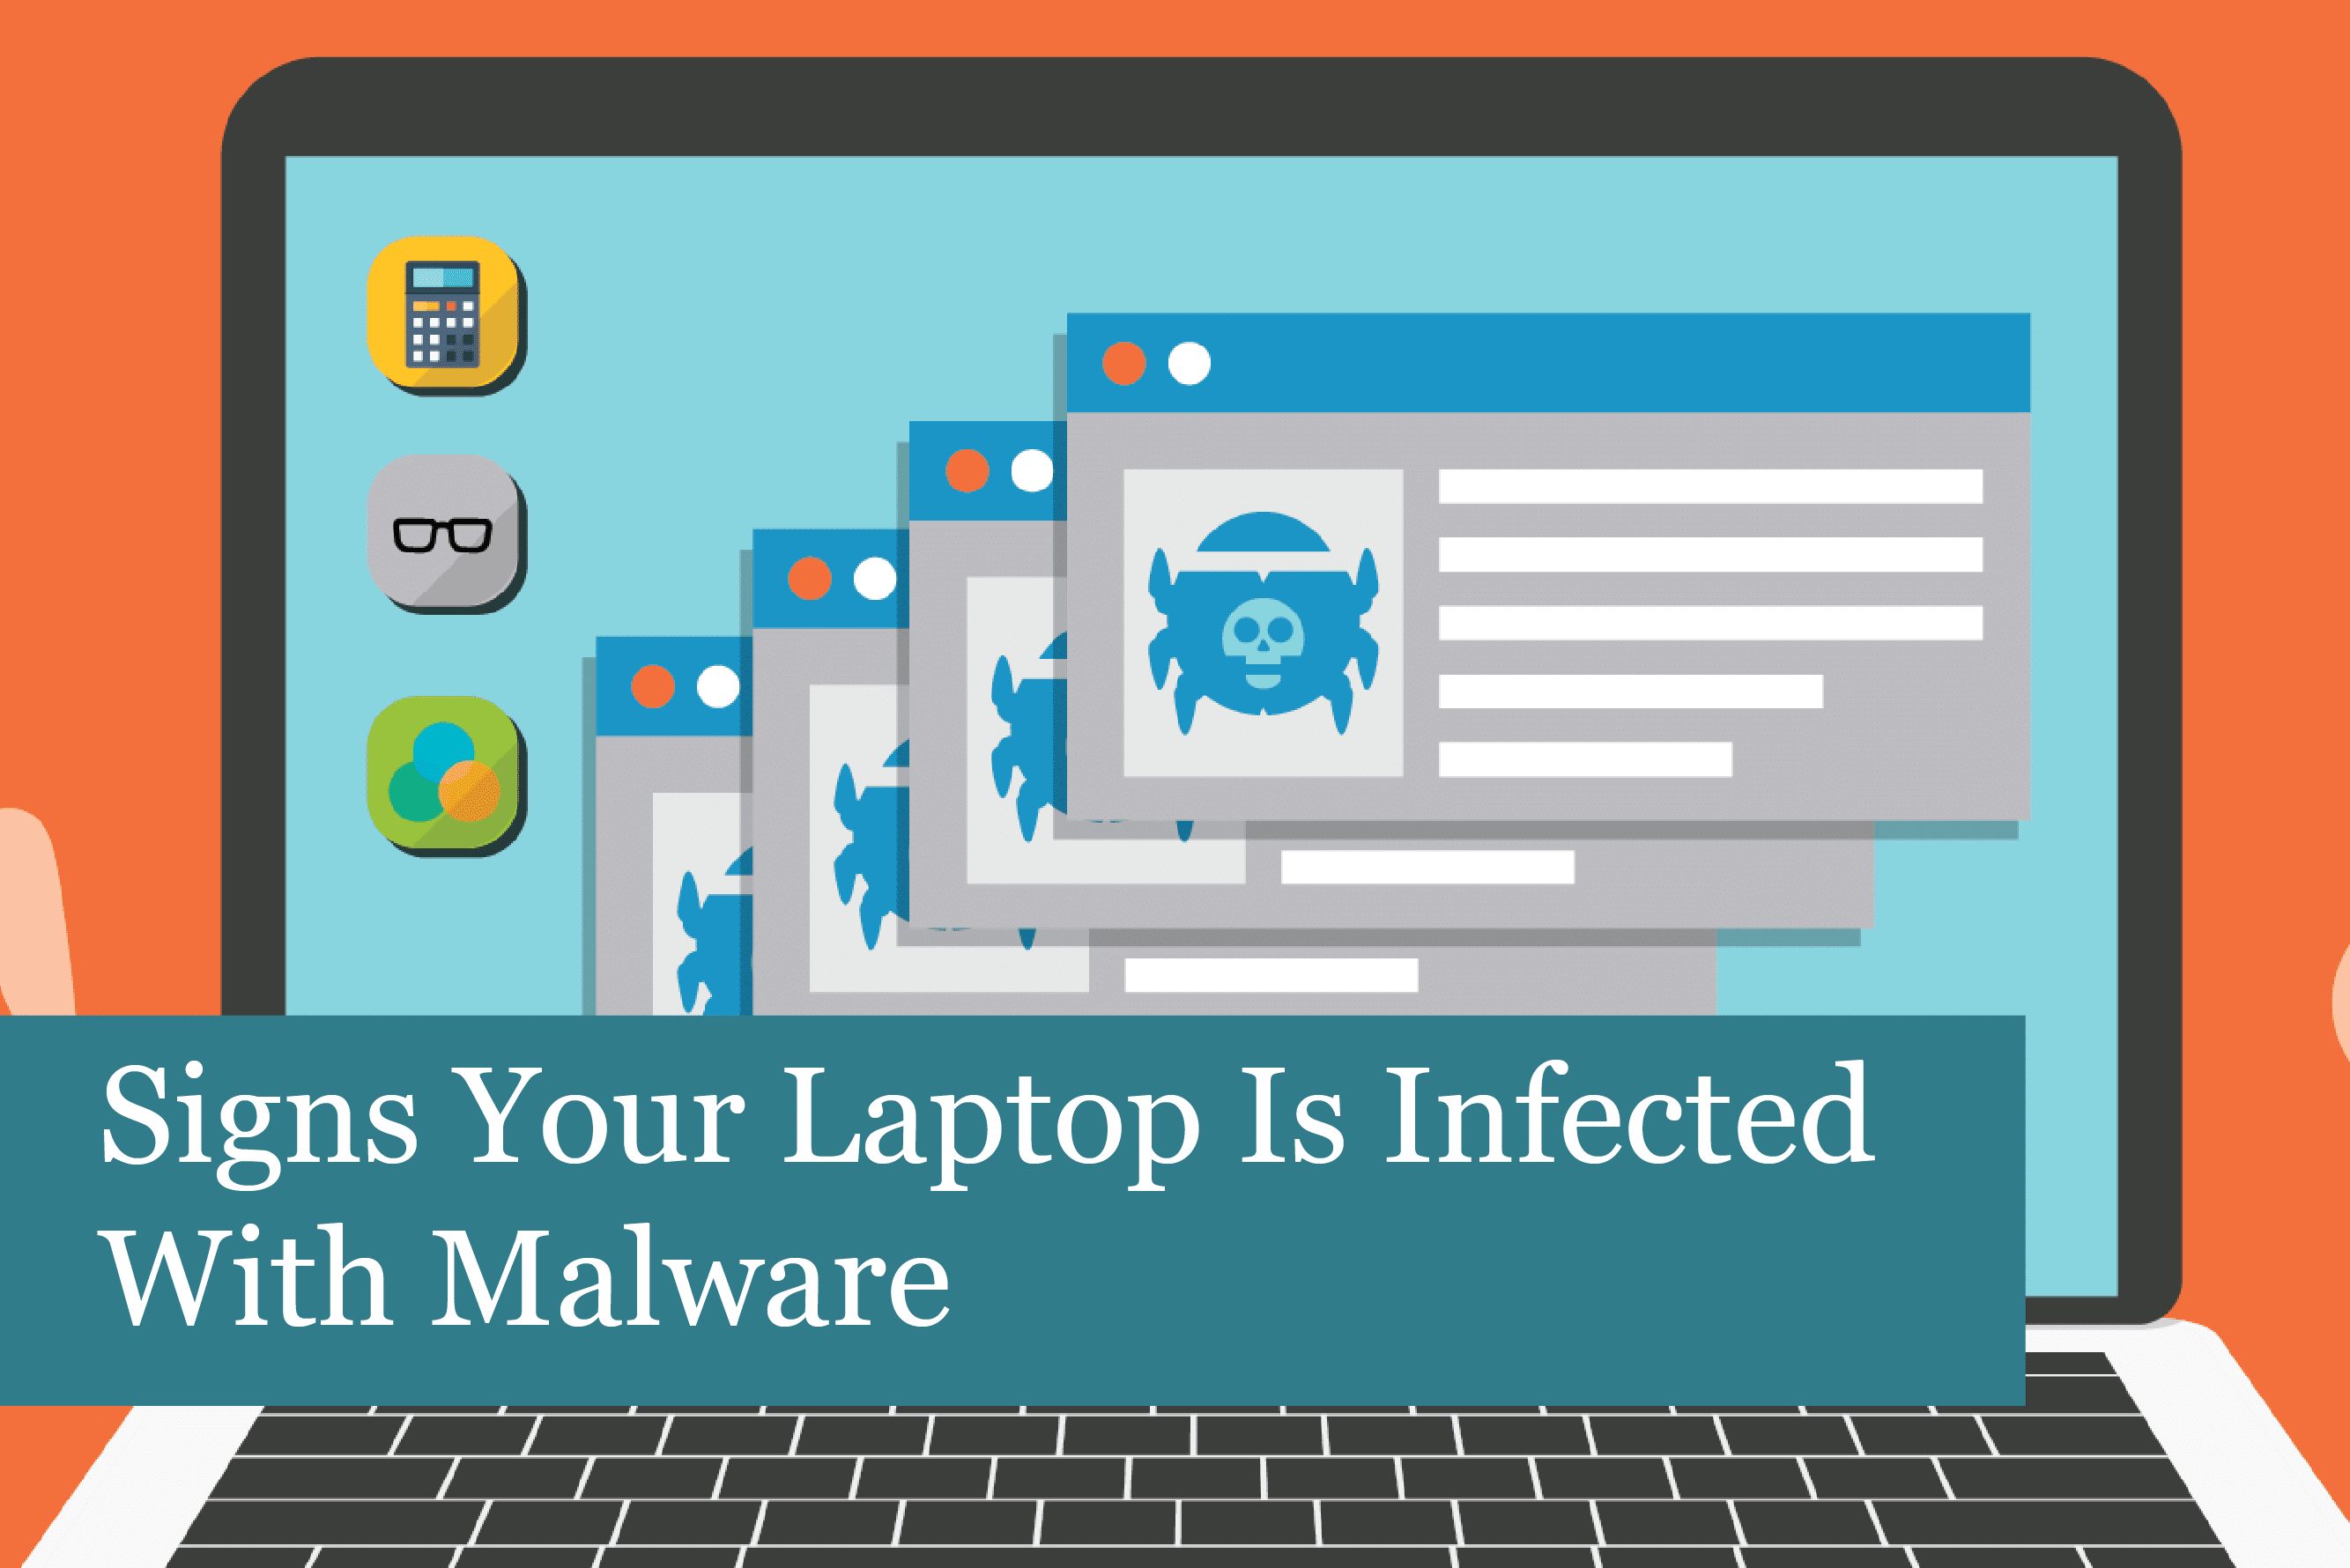 Signs Your Laptop is Infected with Malware